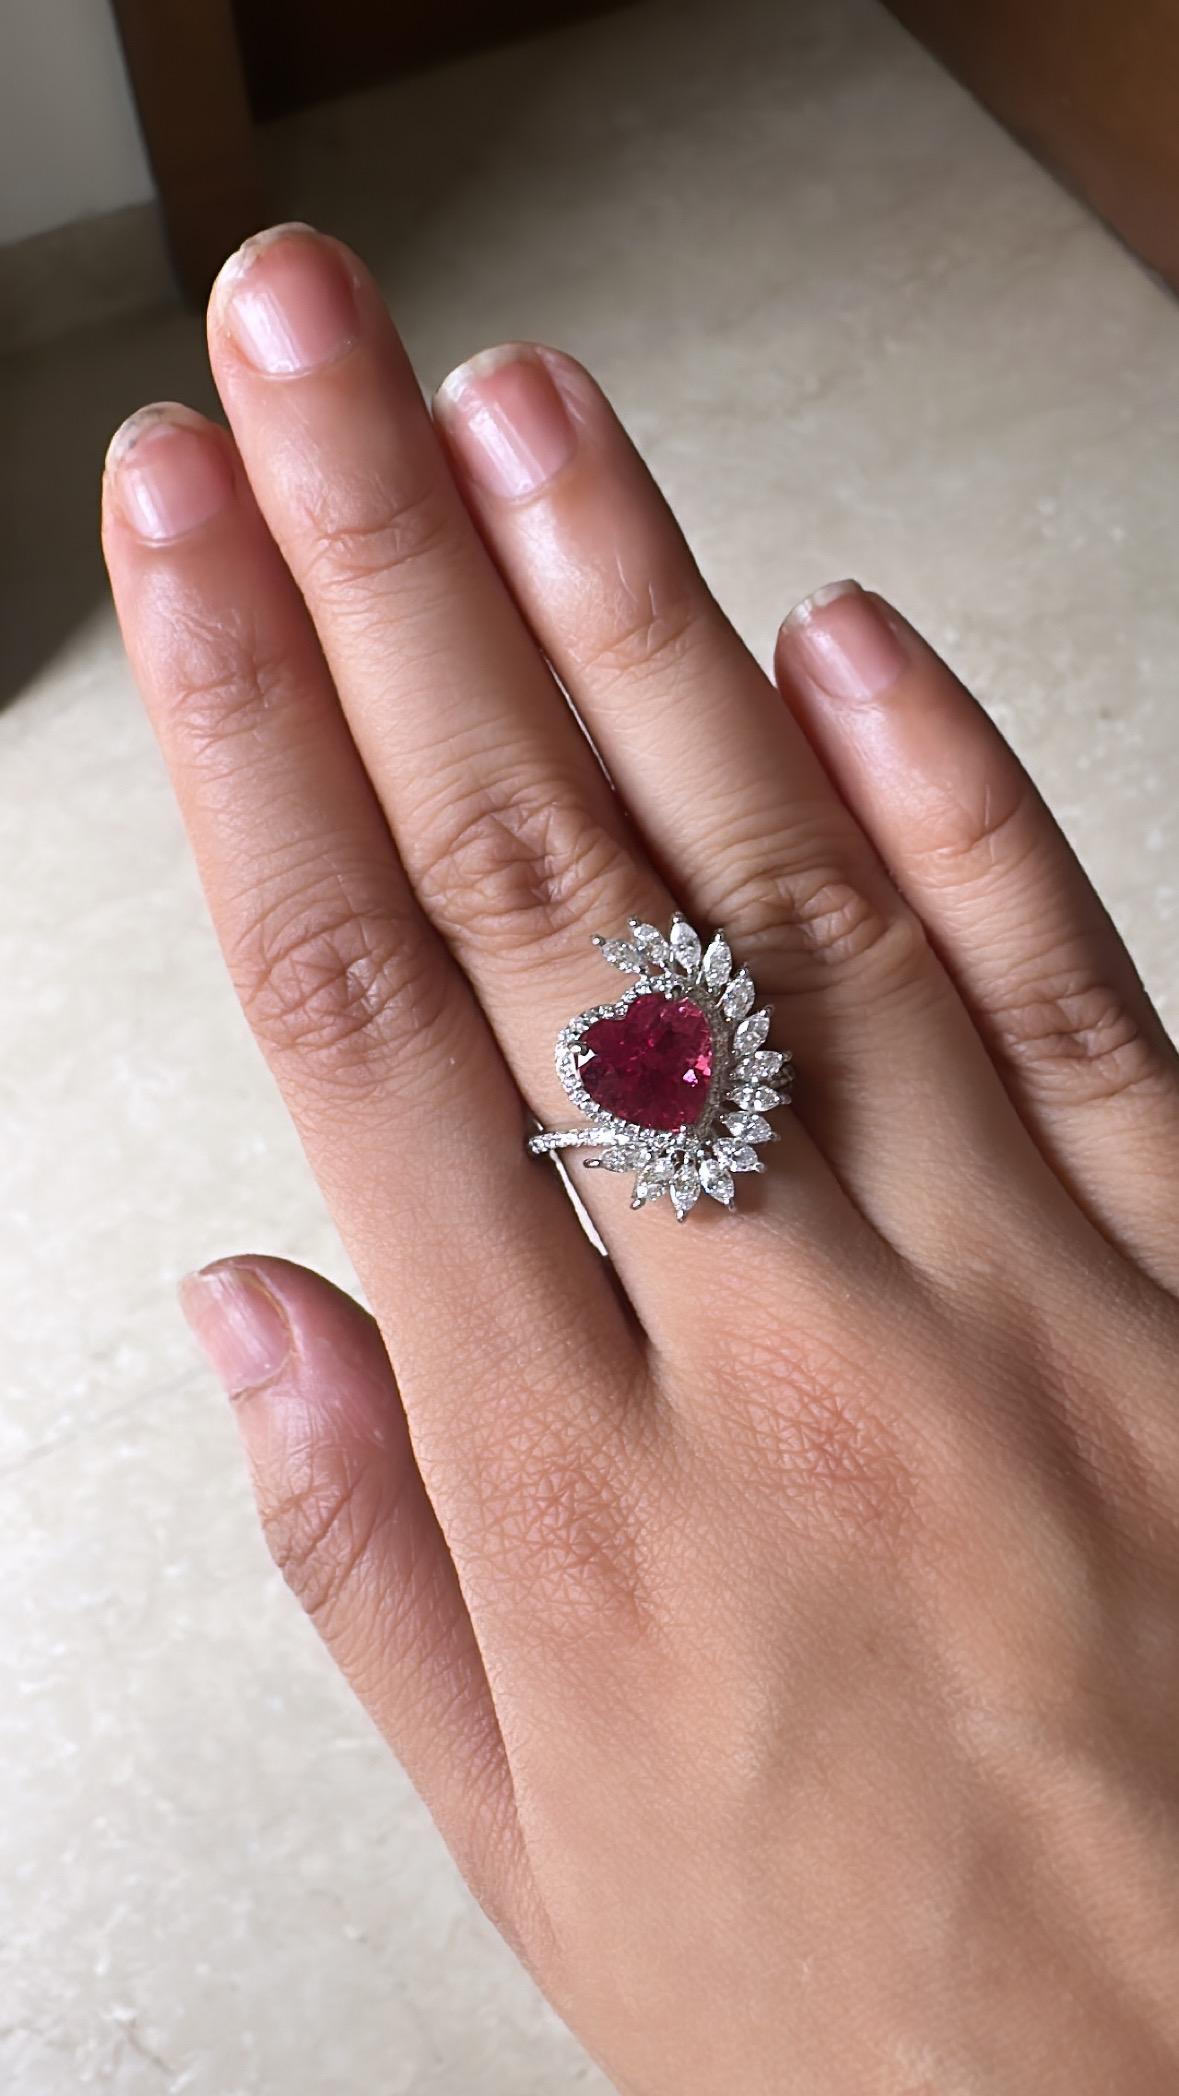 Set in 18K Gold, 3.51 Carats, Rubellite & Diamonds Engagement /Cocktail Ring For Sale 4